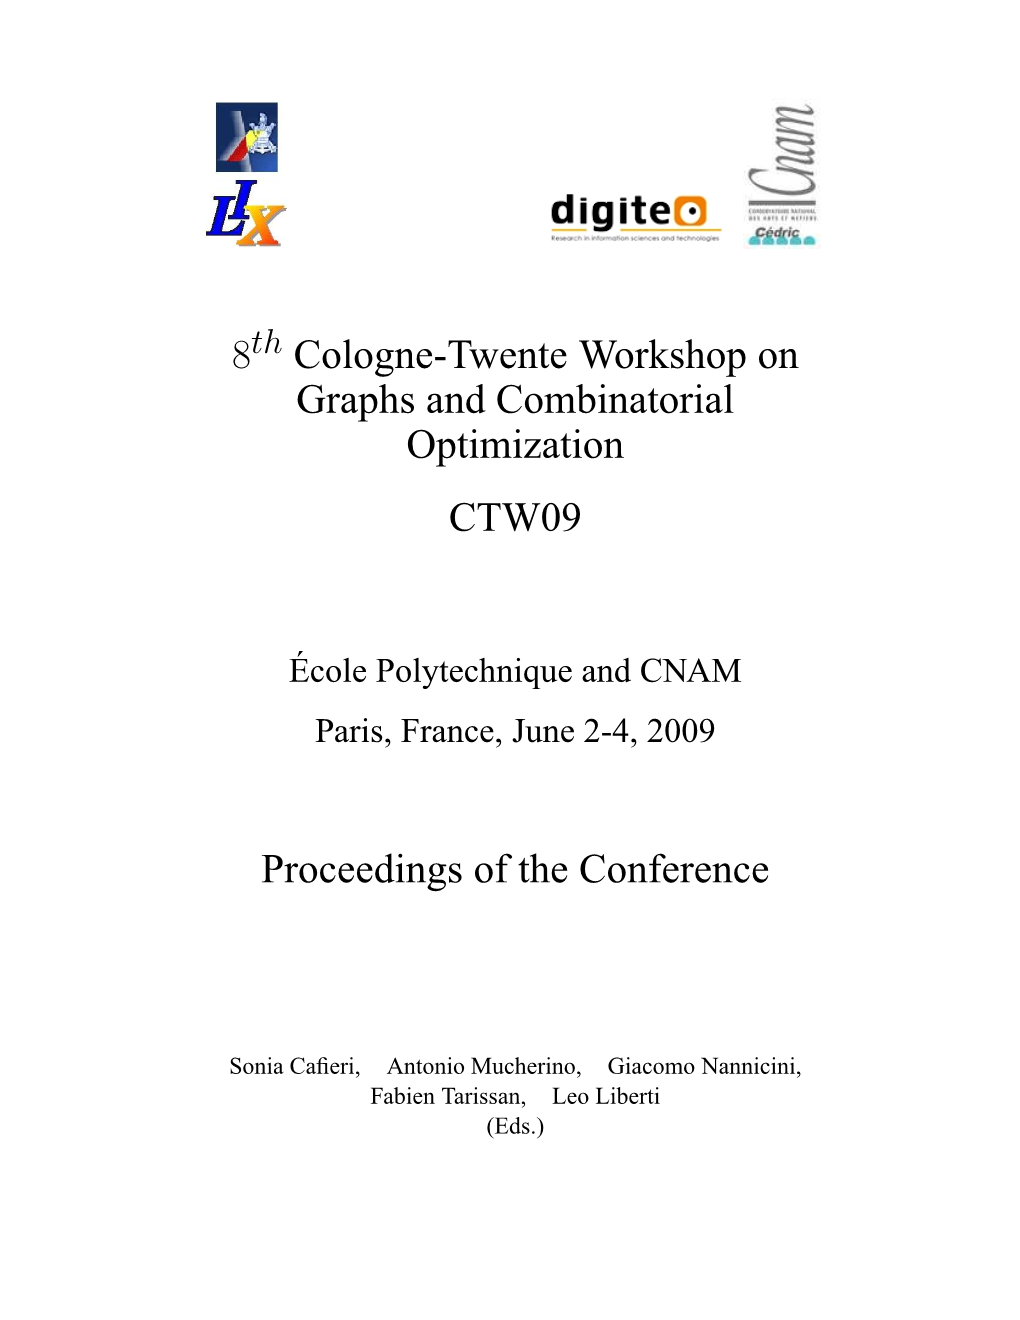 8 Cologne-Twente Workshop on Graphs and Combinatorial Optimization CTW09 Proceedings of the Conference